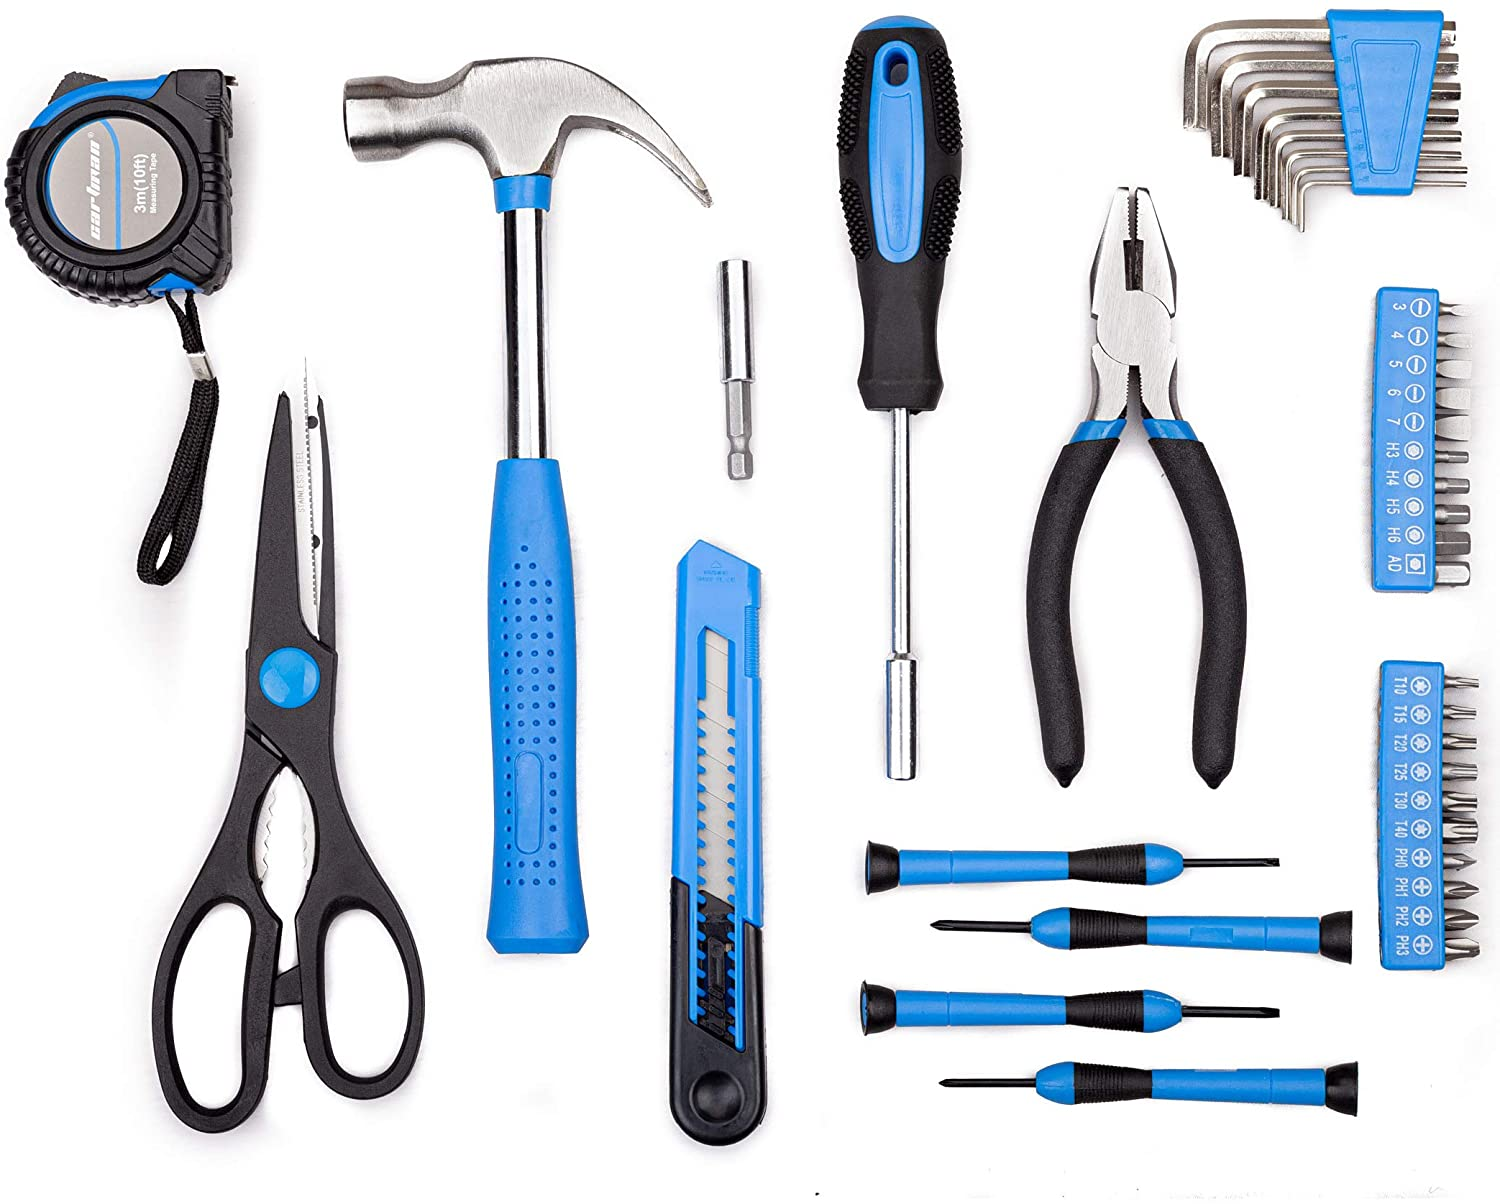 39Piece Cutting Plier Tool Set General Household Kit with Plastic Toolbox Storage Case Blue